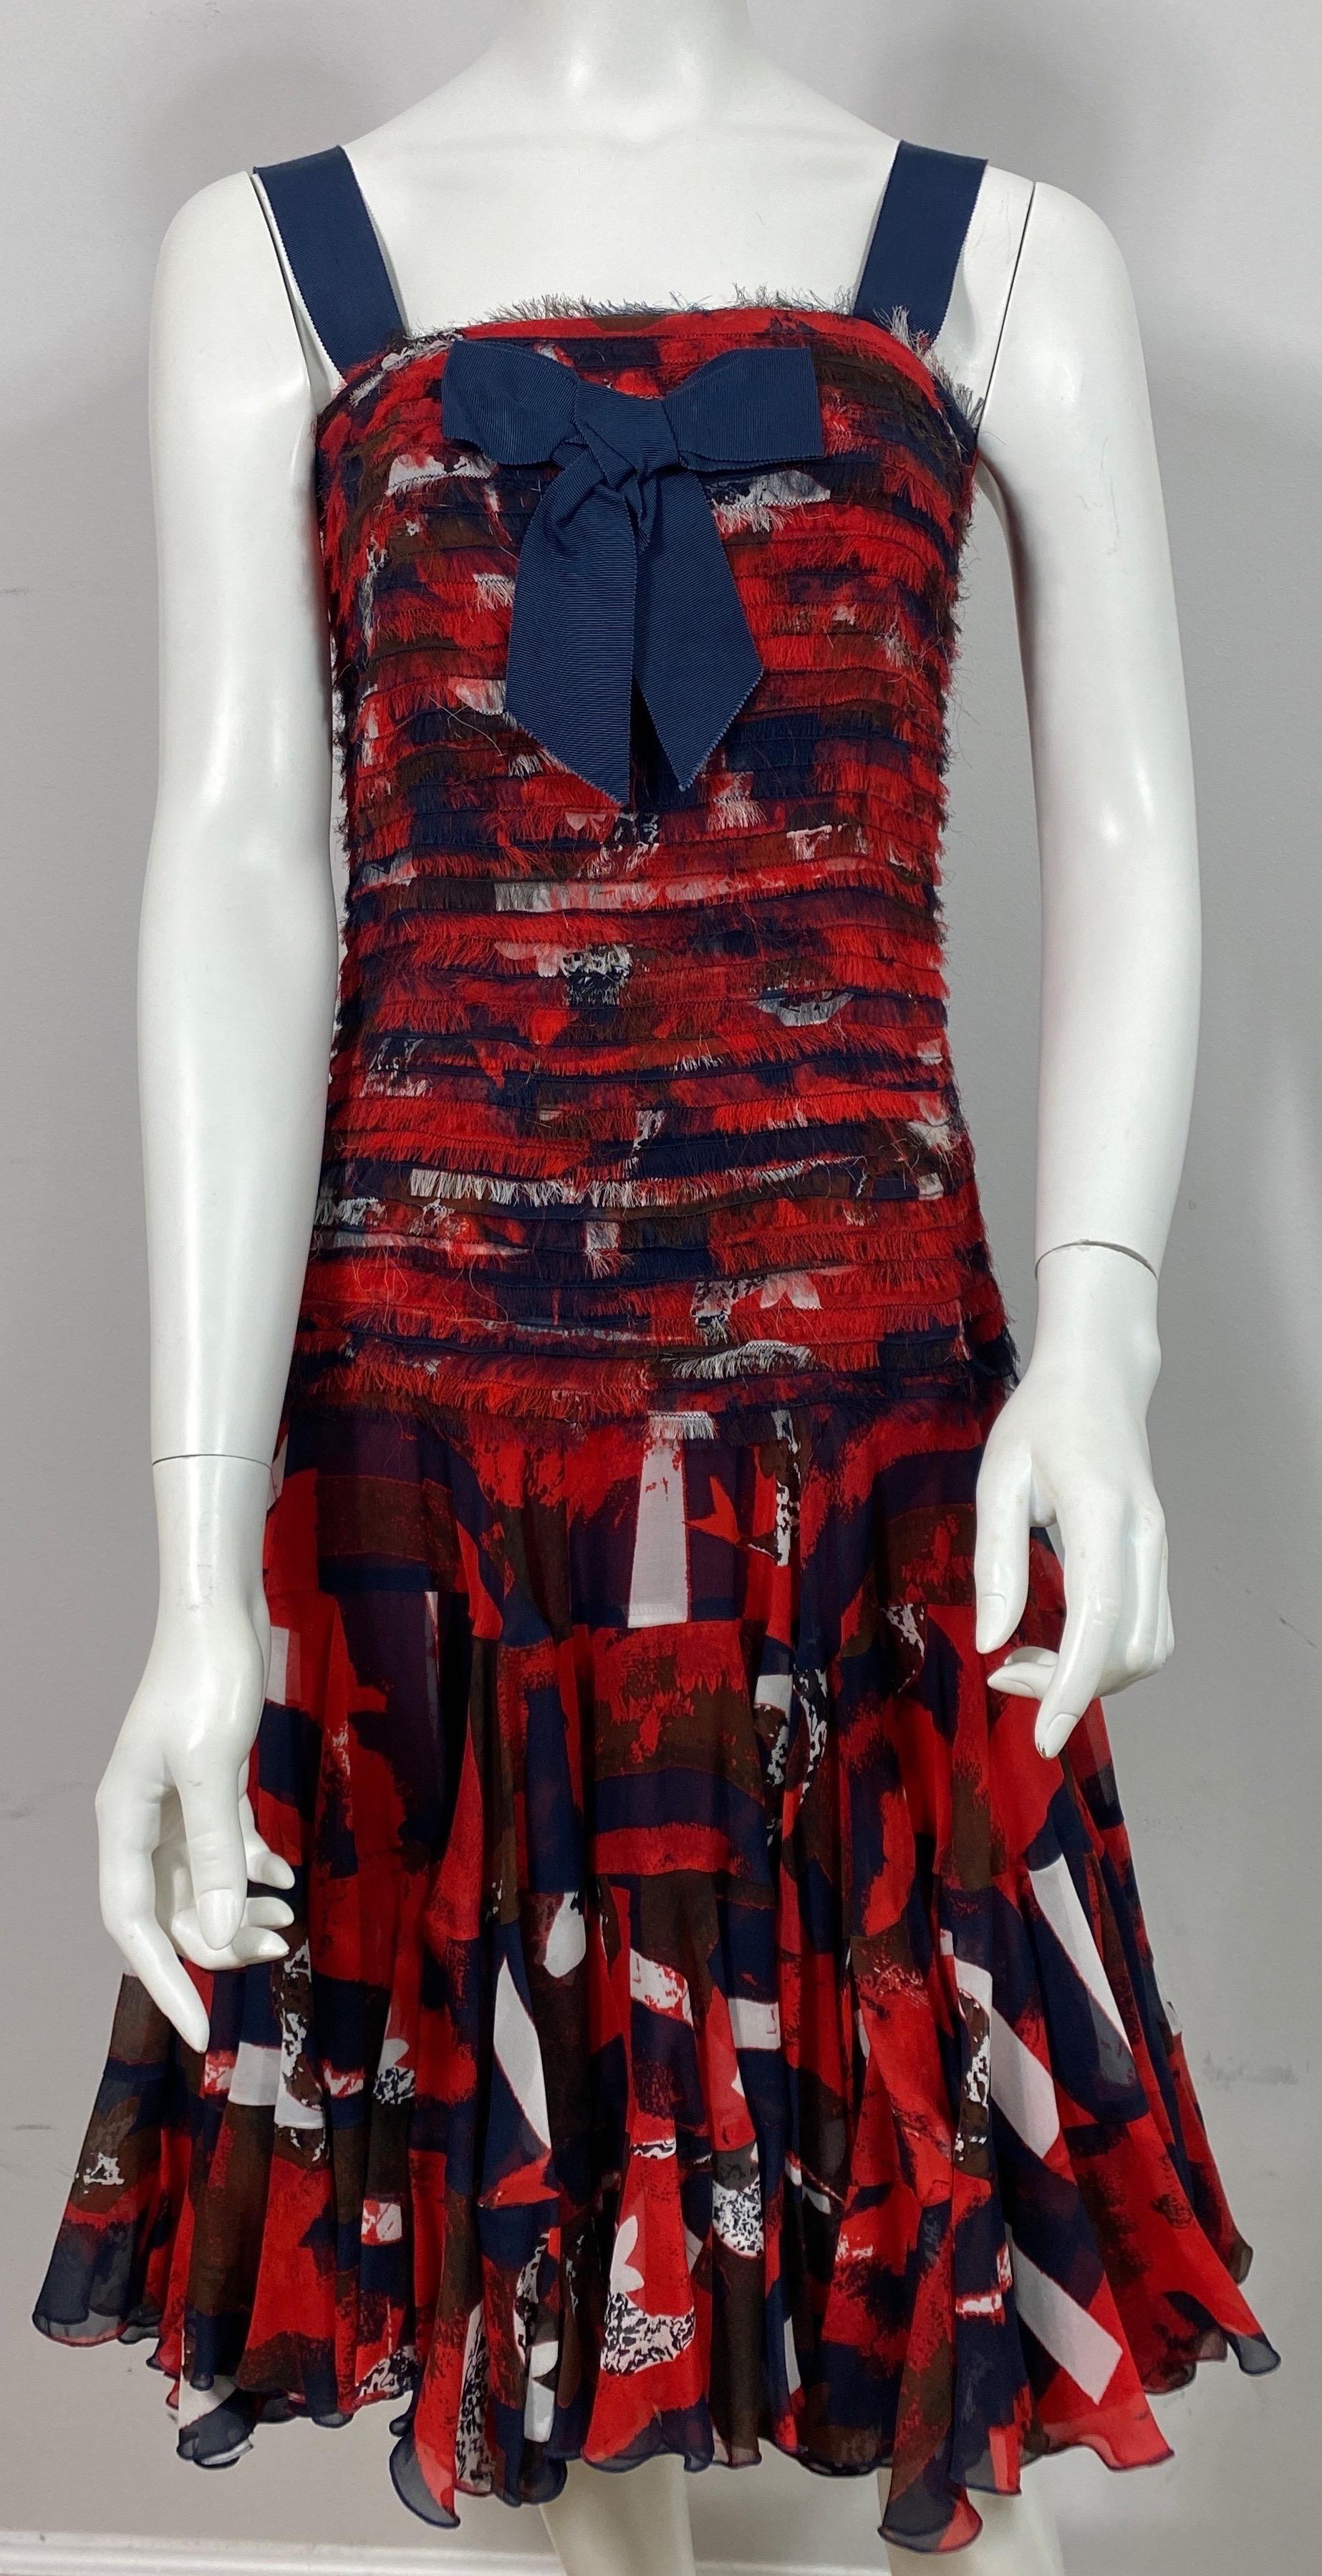 Oscar de la Renta Runway Pre Fall 2011 Red White and Blue Silk Dress- Size M  This runway Oscar creation was look #22 of the Pre Fall 2011 Collection. The dress is made of a red, blue and white silk print that has a fitted frayed edge shutter pleat